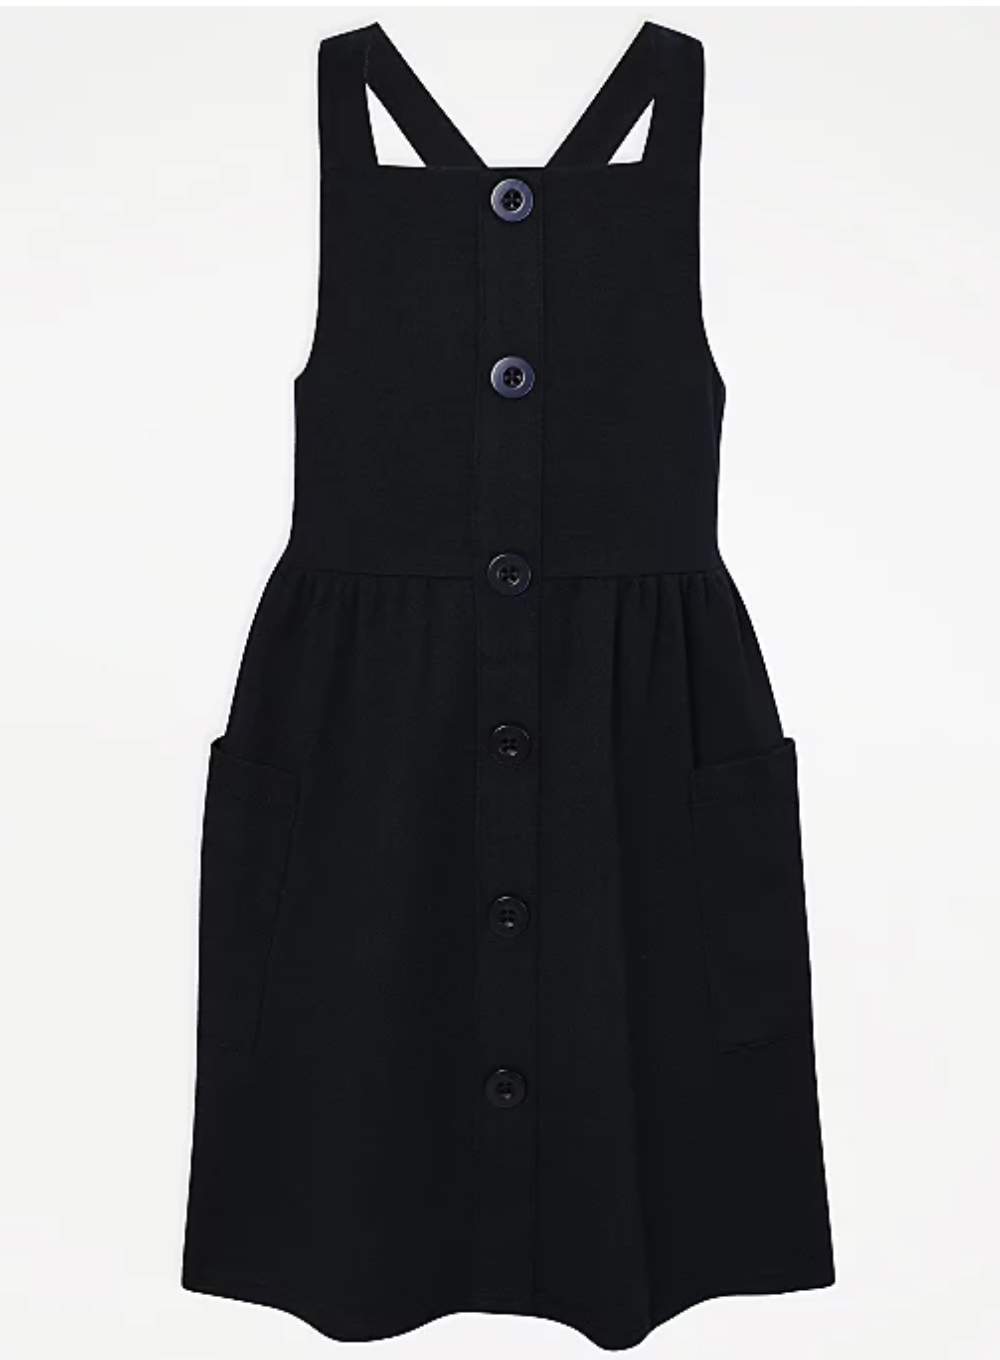 Girls' Navy Sleeveless Jersey Pinafore Dress, Square Neckline, Front Pockets, 12-13 Y